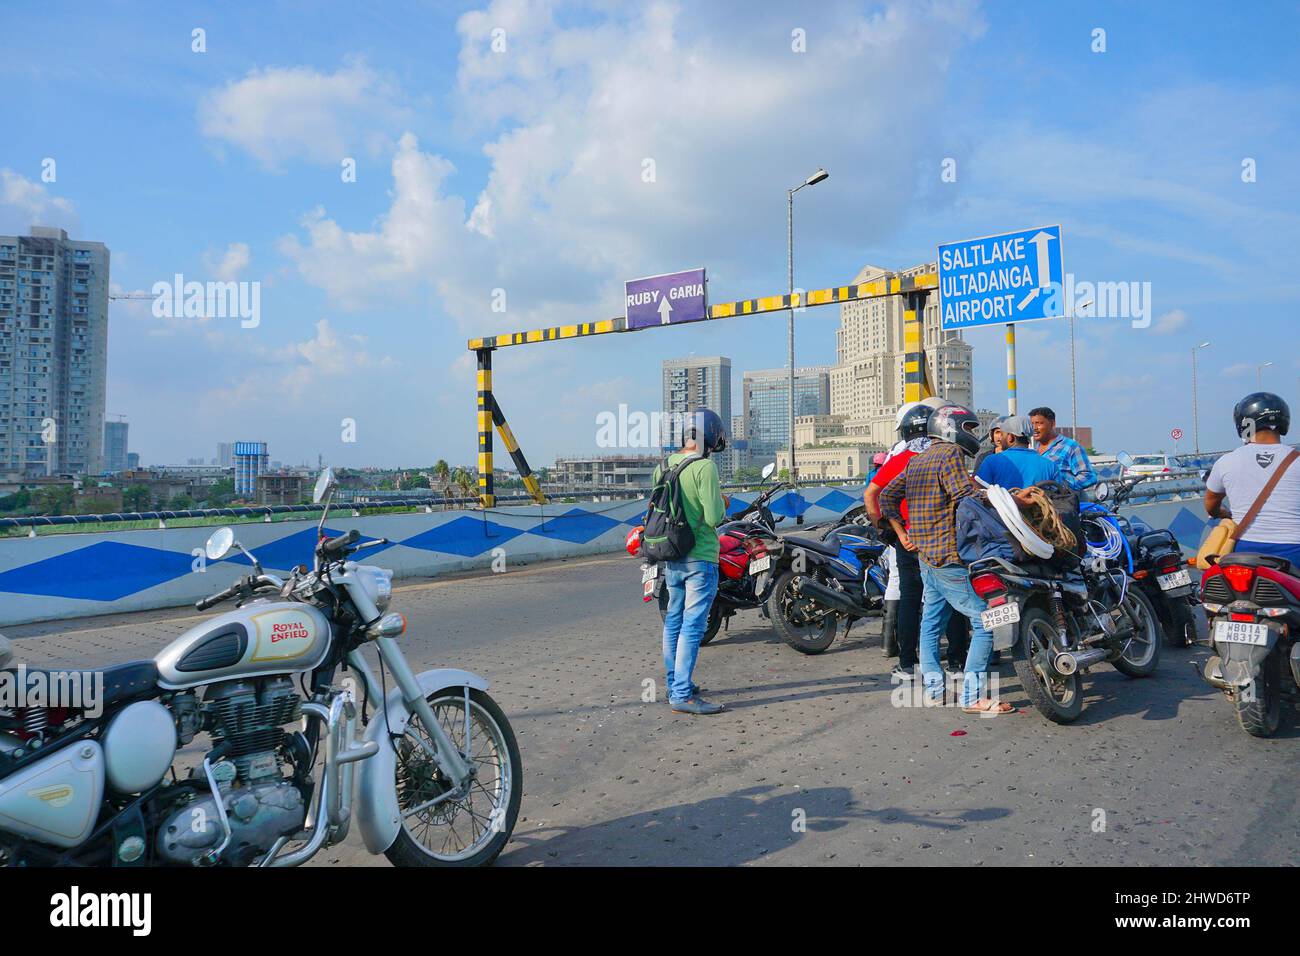 Kolkata, West Bengal, India - 20th July 2019 : Bikers assembled on Maa flyover to resolve a traffic issue, modern buildings, blue sky and white cloud Stock Photo